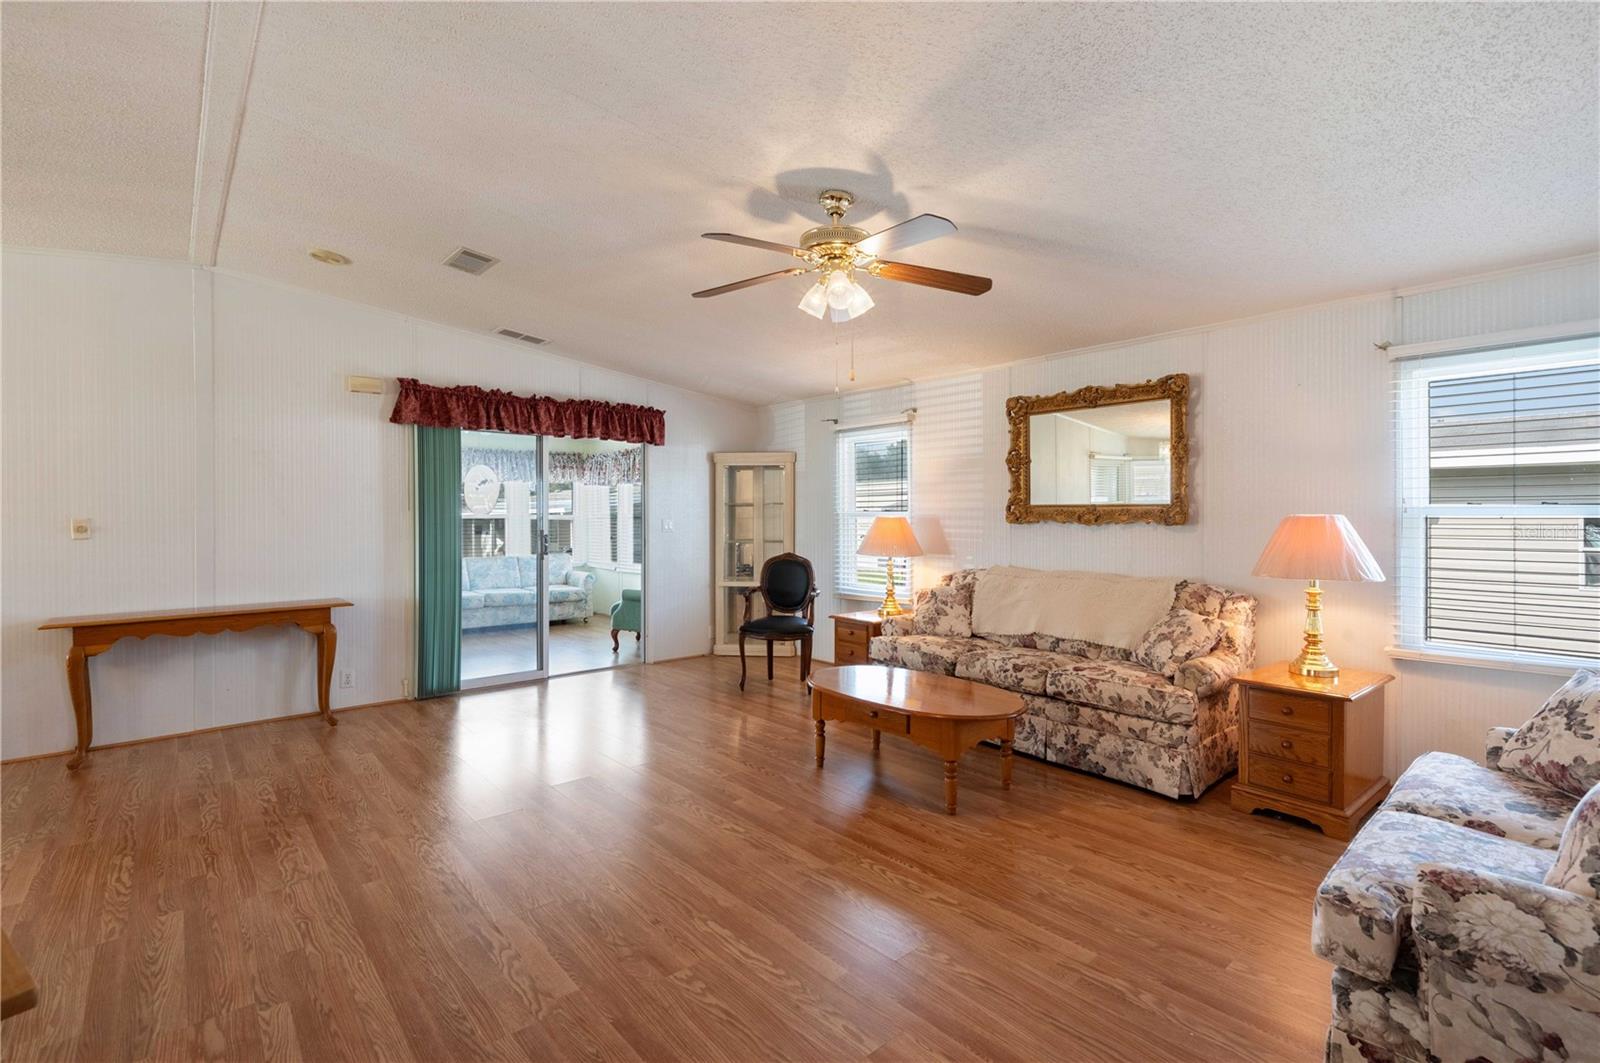 Oversized living room offers laminate flooring, ceiling fan, and great access to front Florida room.